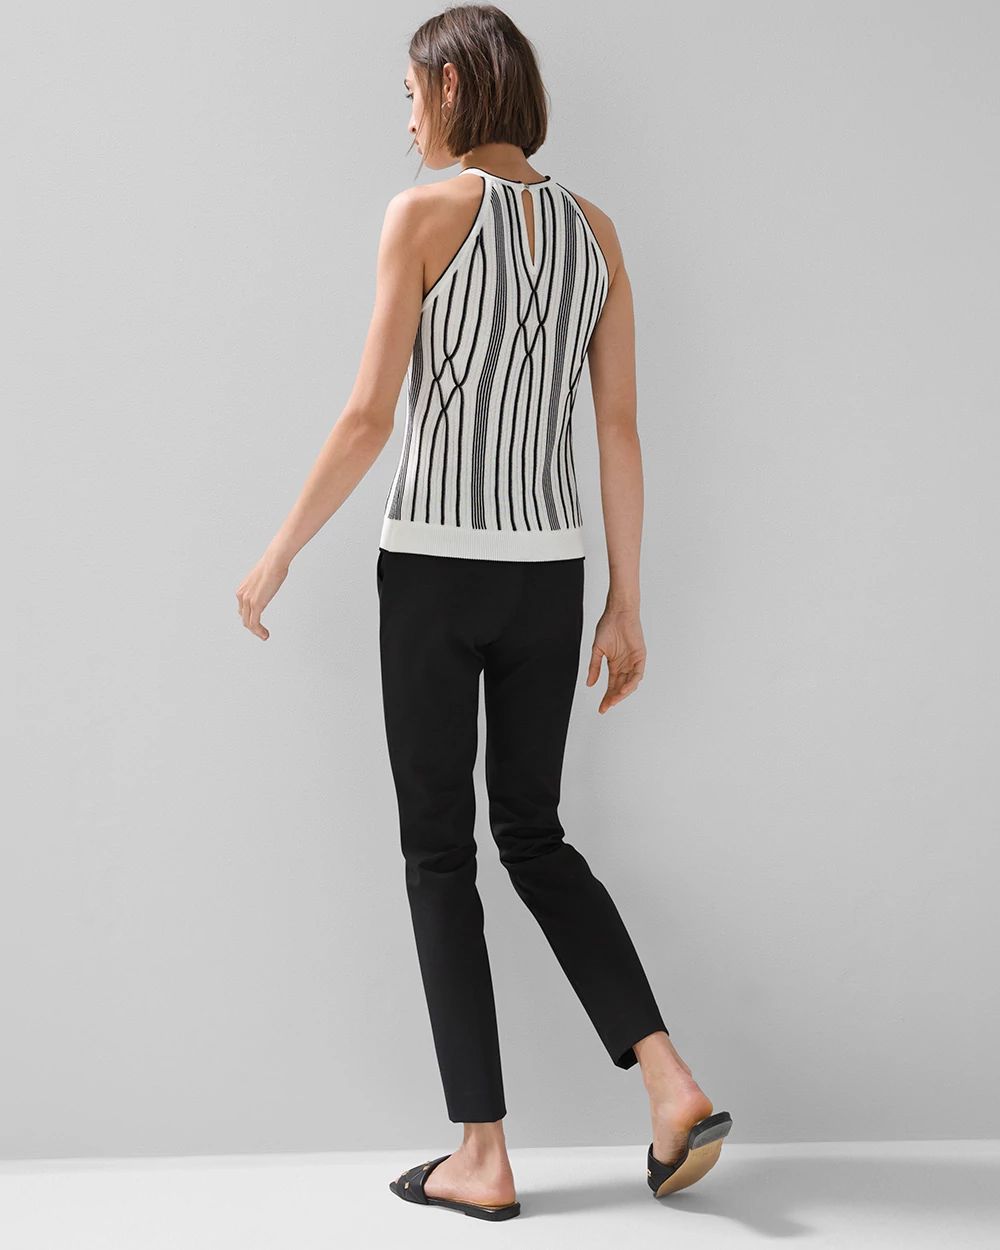 Black + White Pleated Sweater Halter Top click to view larger image.